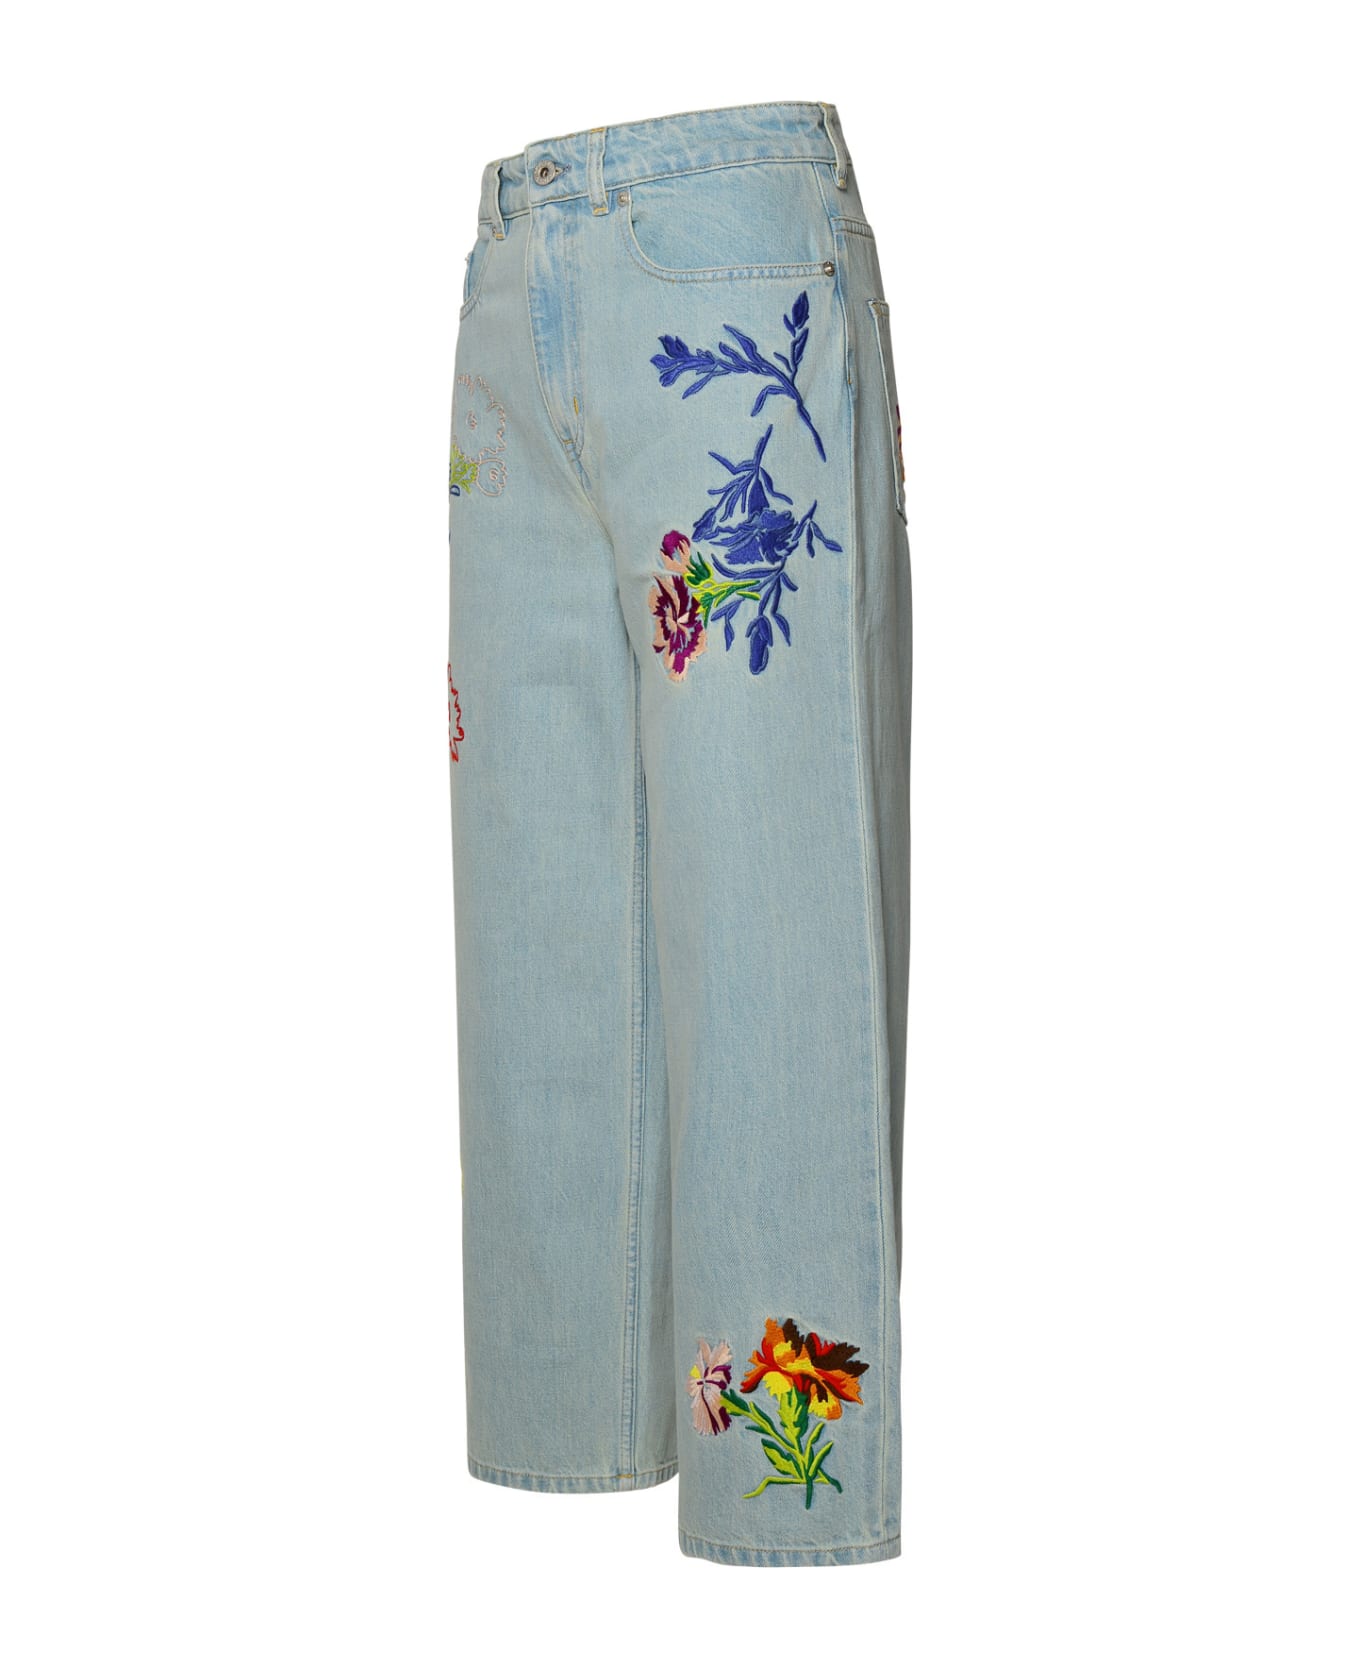 Kenzo Flower Jeans - STONE BLEACHED デニム